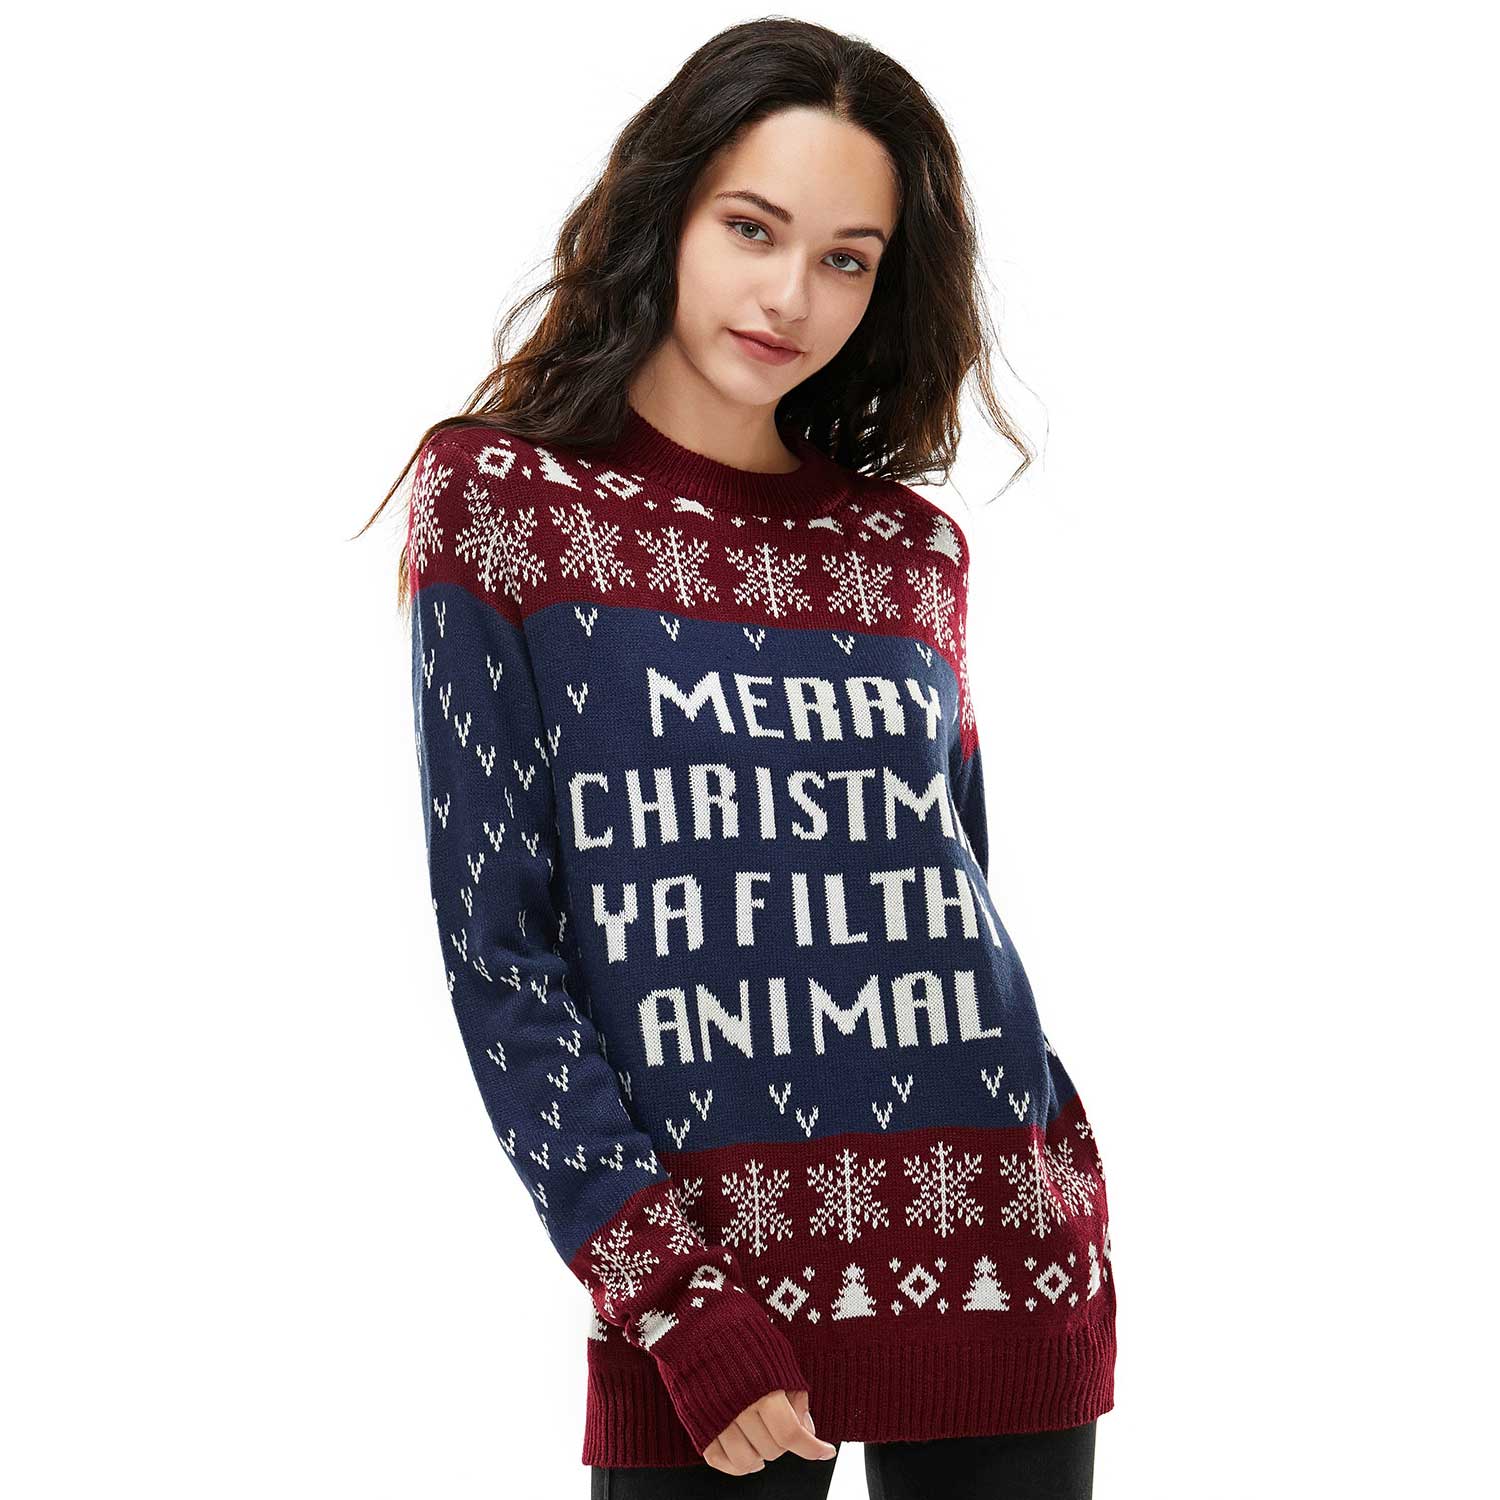 Fair Isle Filthy Animal Mens Funny Christmas Holiday Sweater